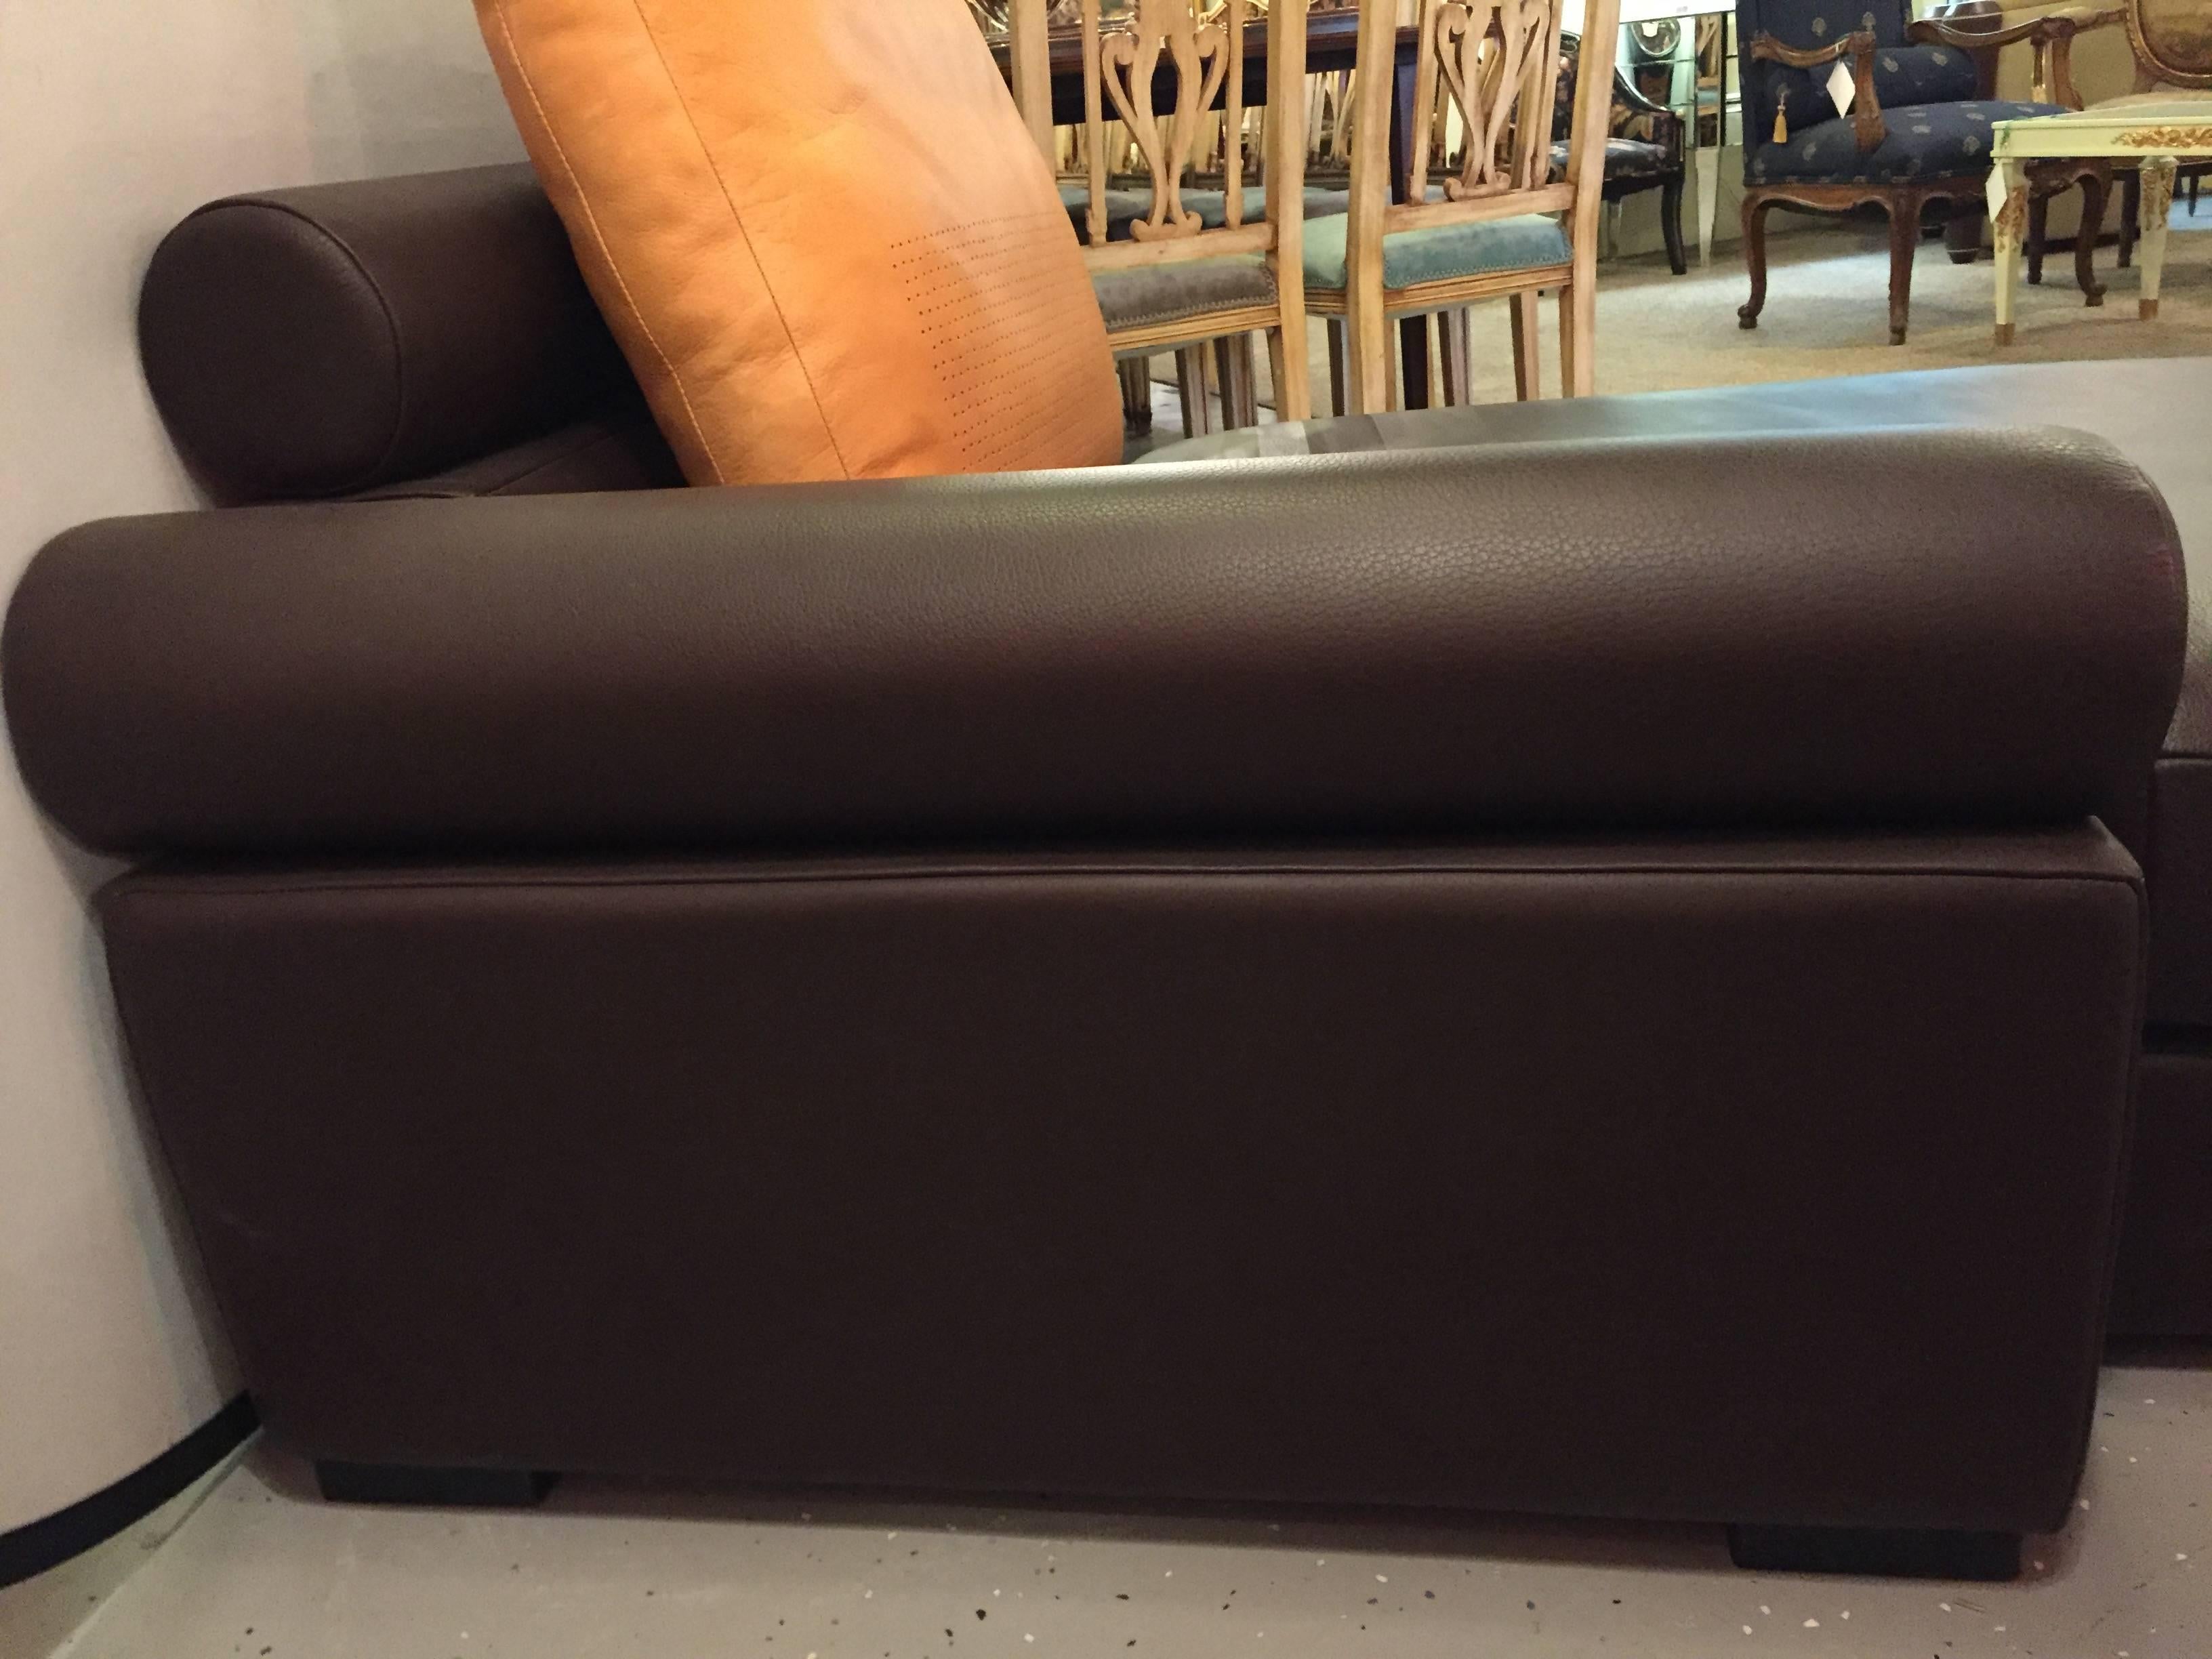 Contemporary Chaise Lounge or Daybed in Brown Leather with Cushion by Roche Bobois